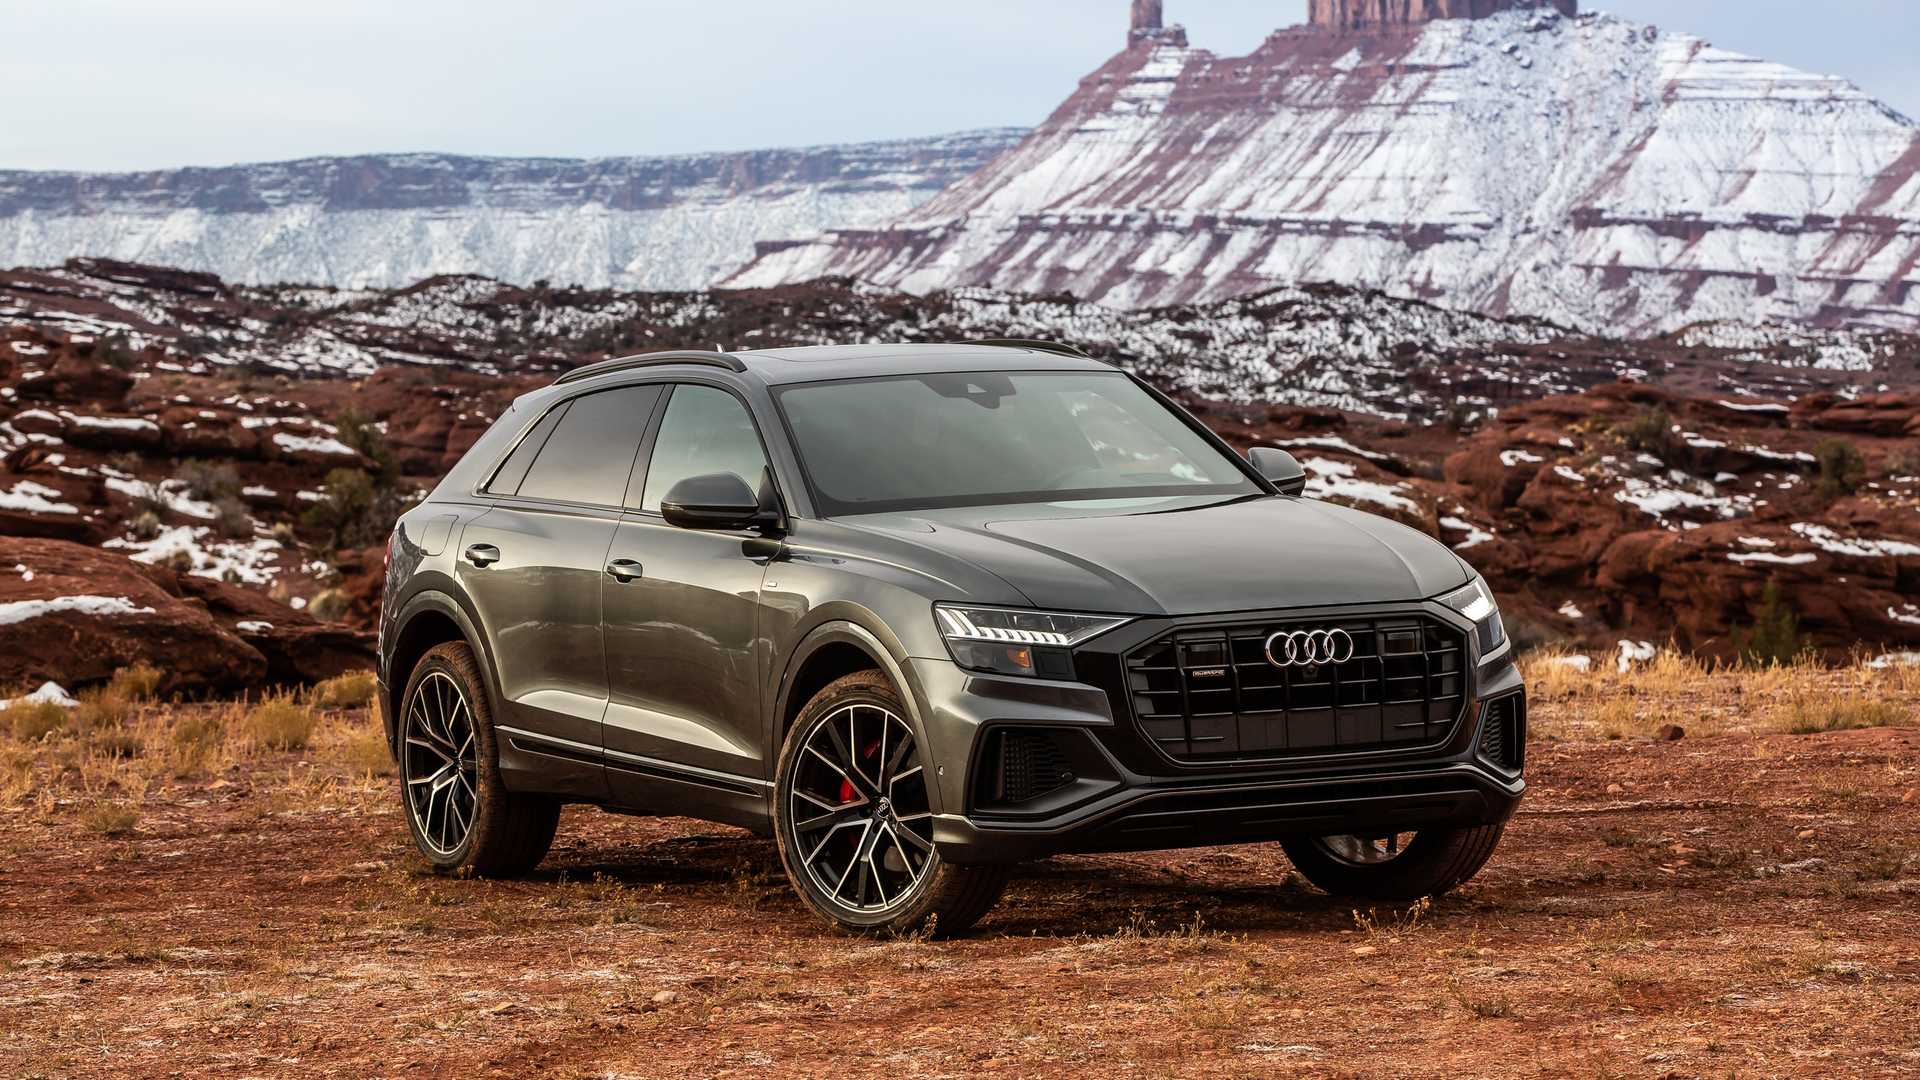 Audi Q8 front angular profile in the mountains